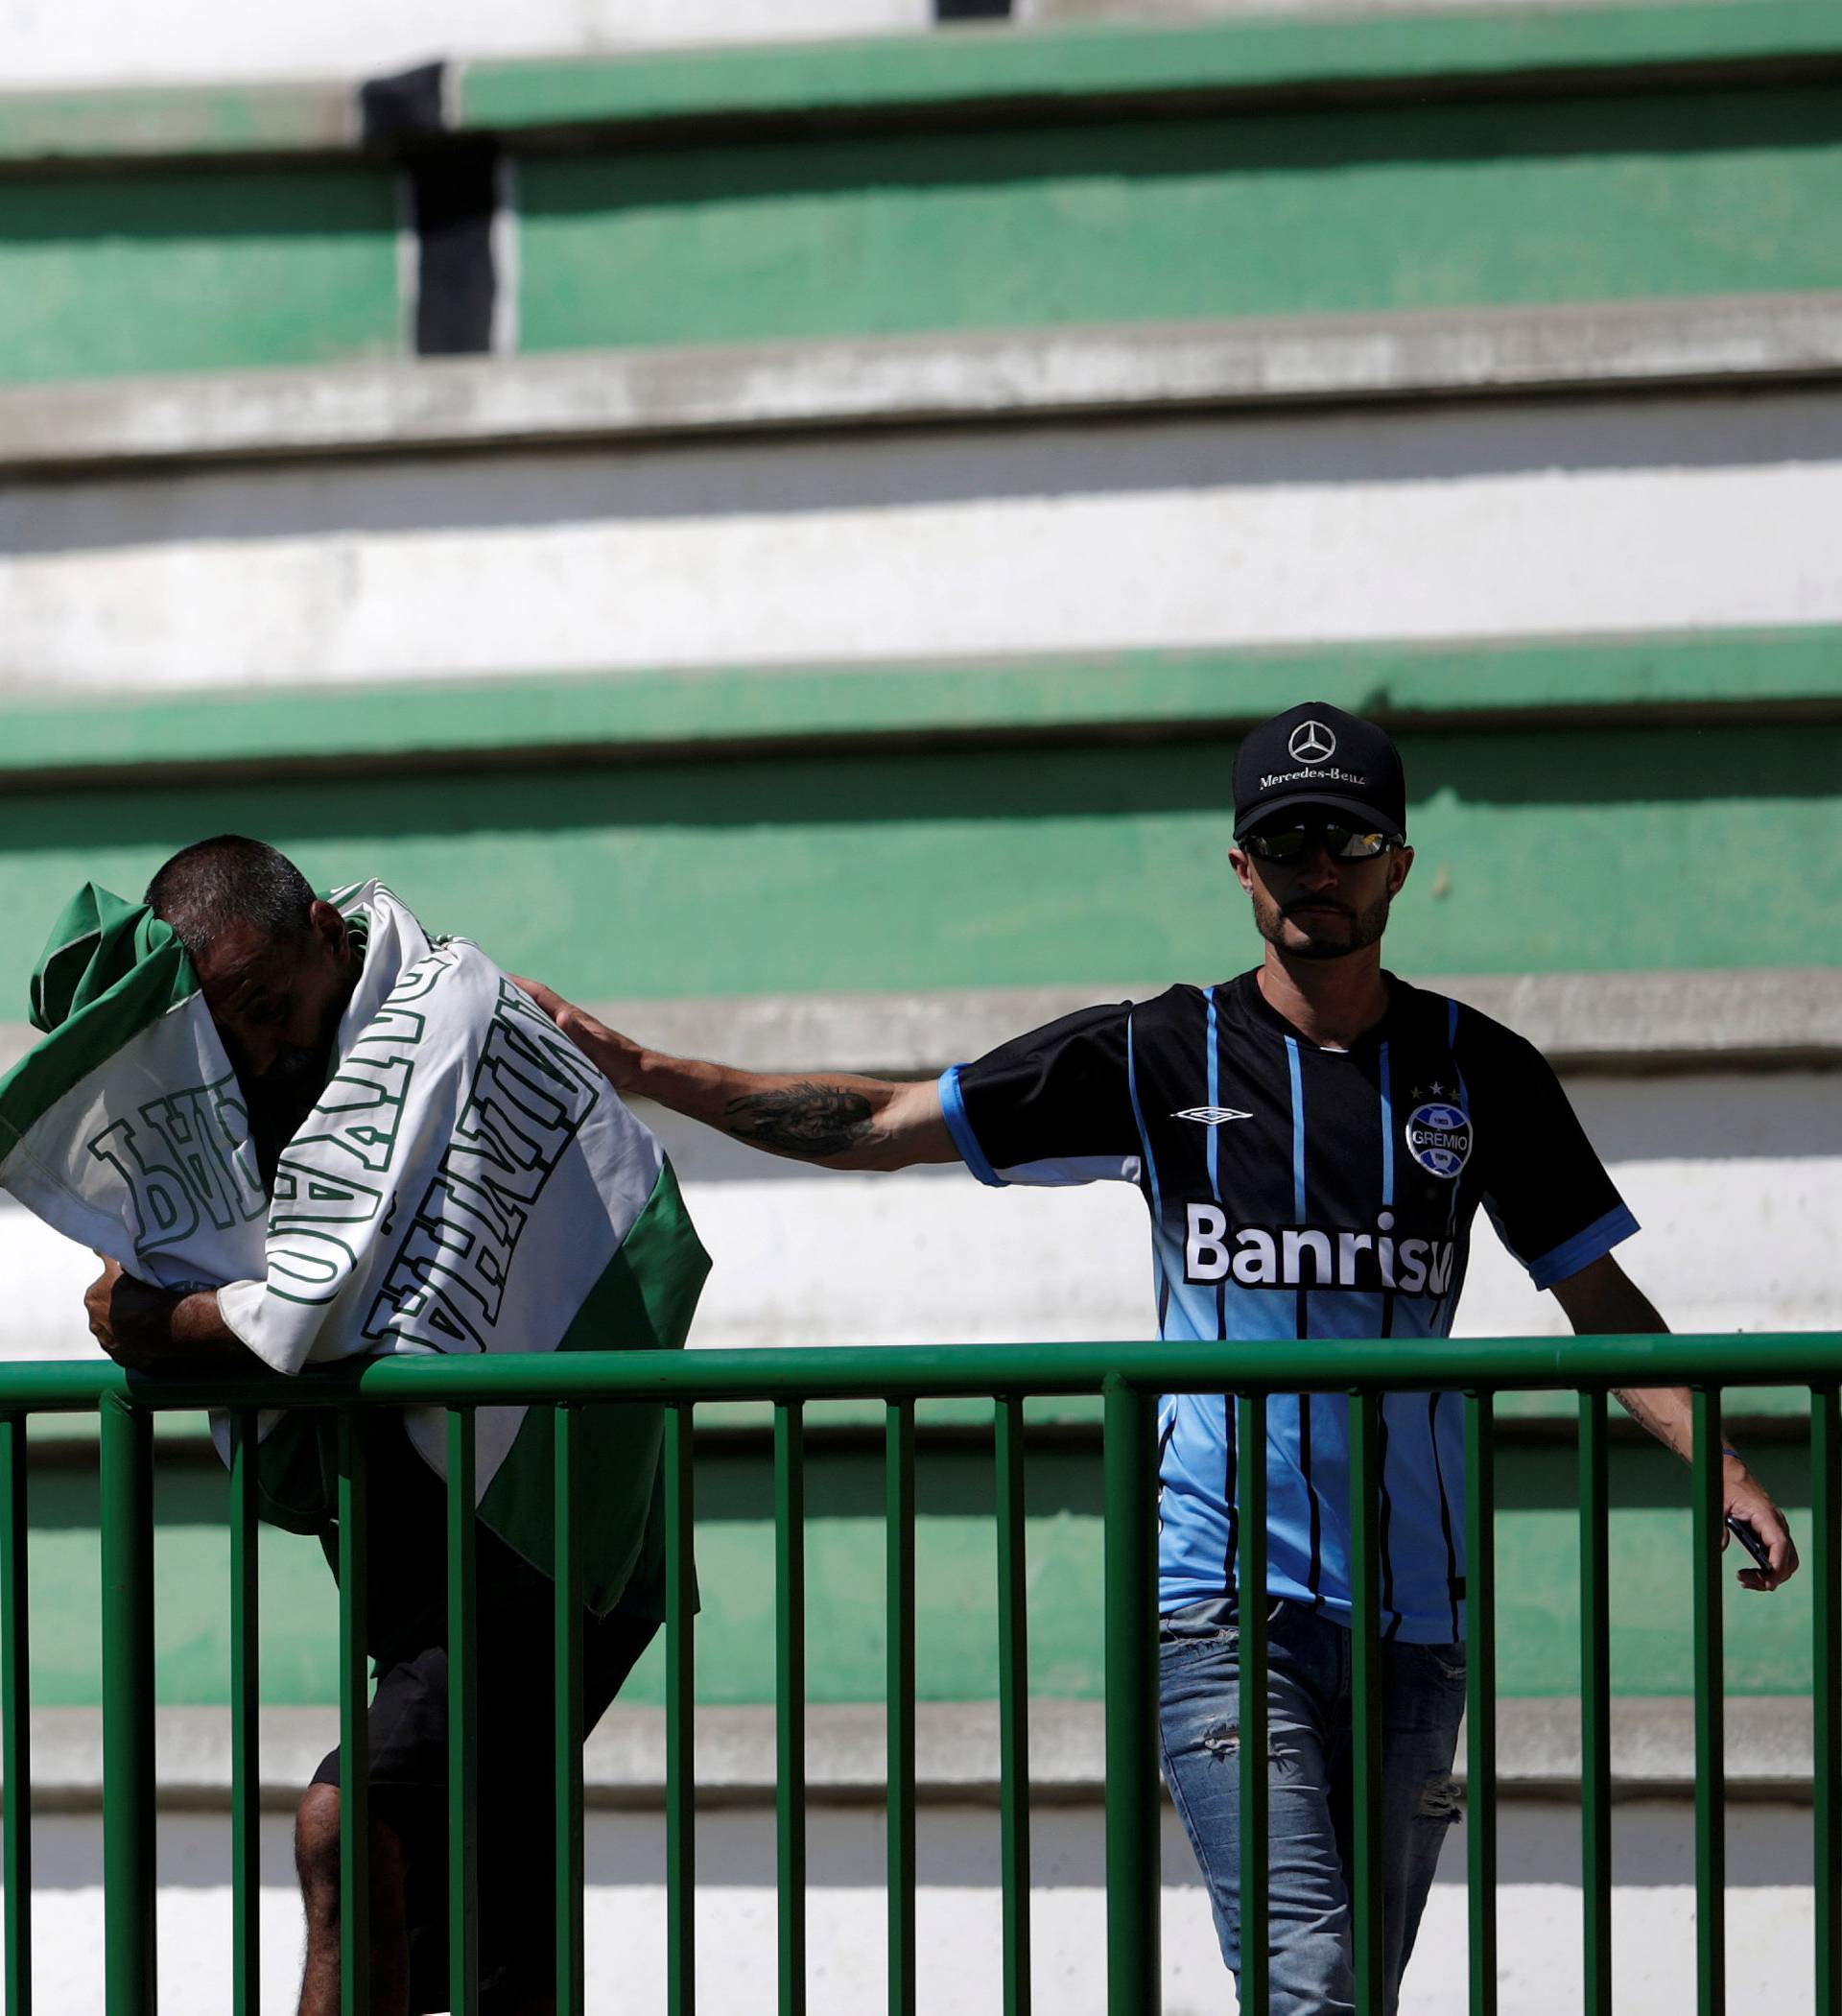 A soccer fan wearing a jersey of Gremio soccer club comforts a fan of Chapecoense soccer team reacting at the Arena Conda stadium in Chapeco